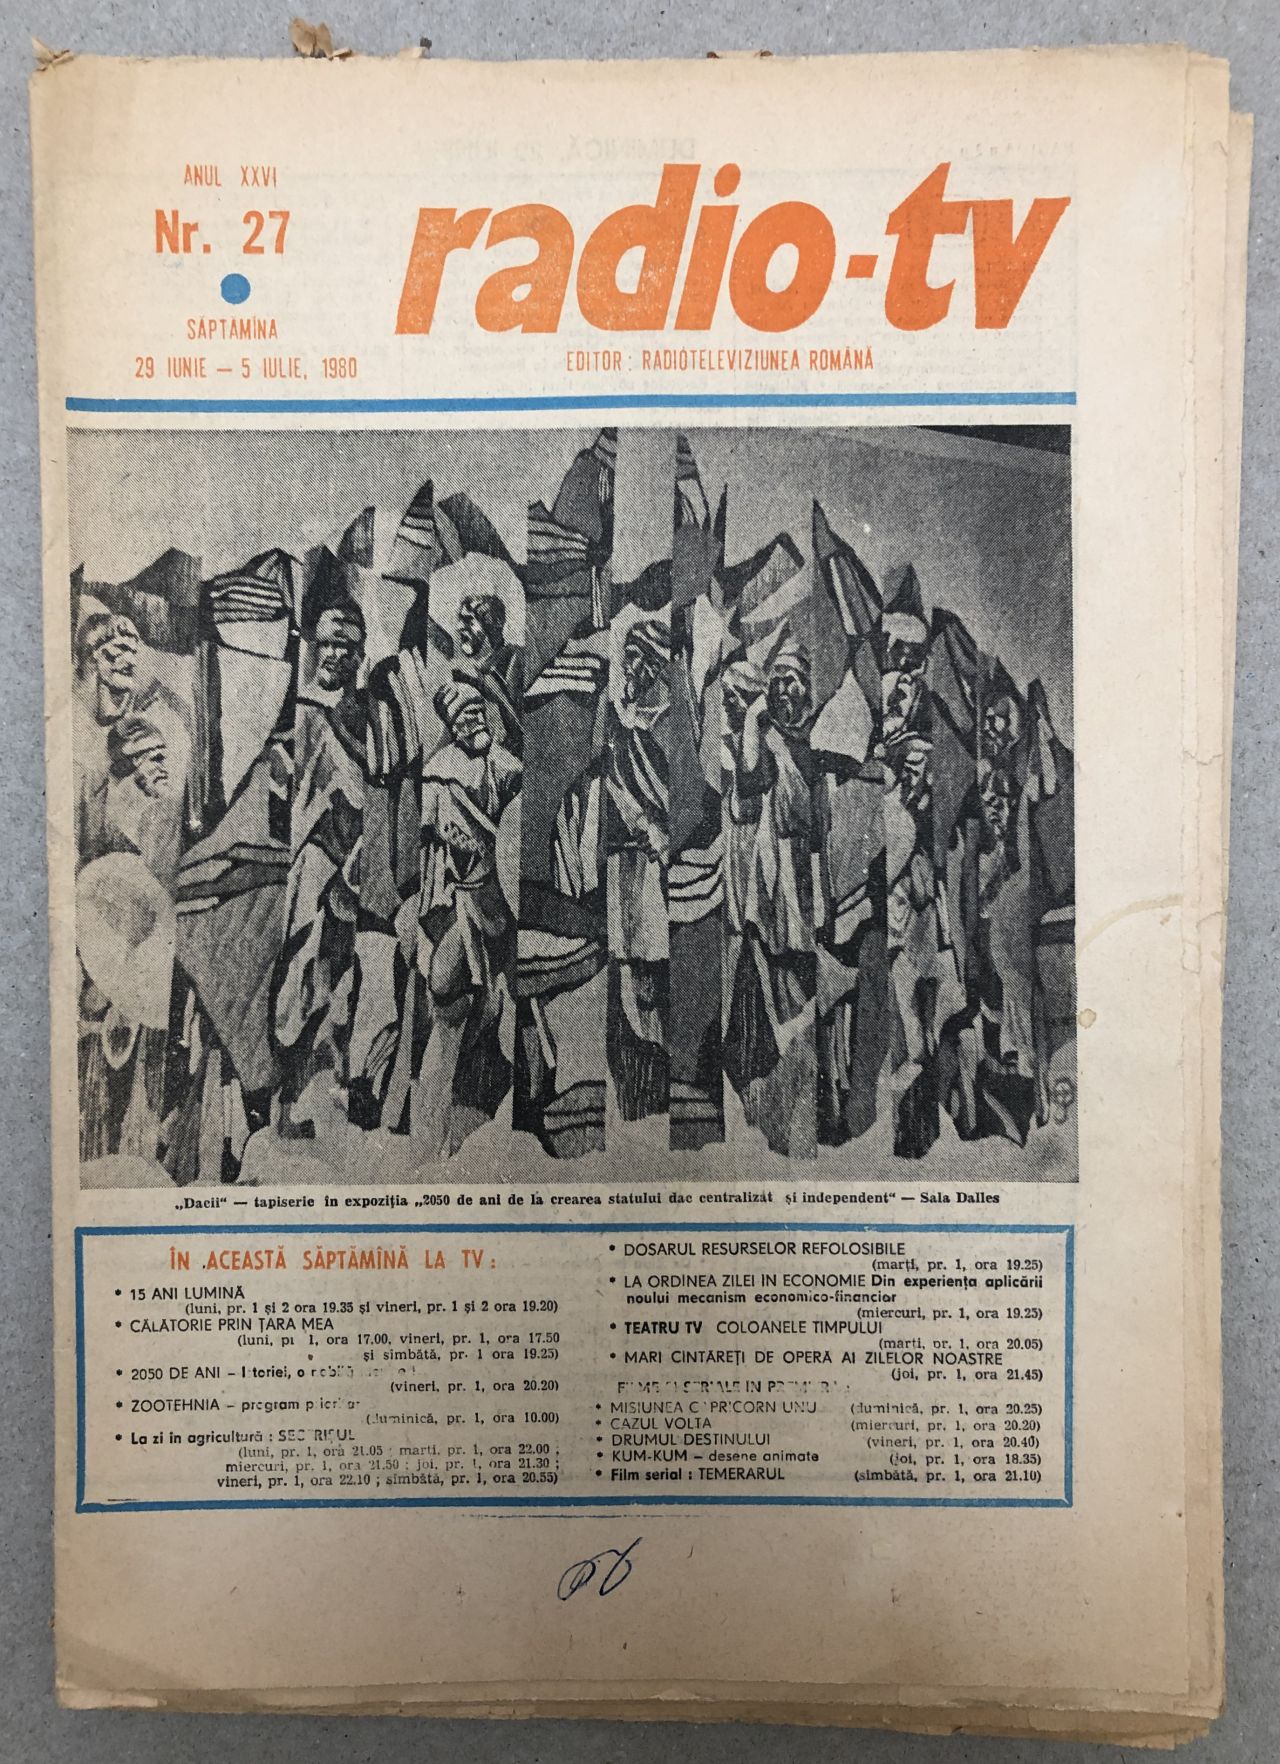 Changes from Soaked In Radio-TV, program vechi, 29 iunie 1980 – kolectionarul.ro